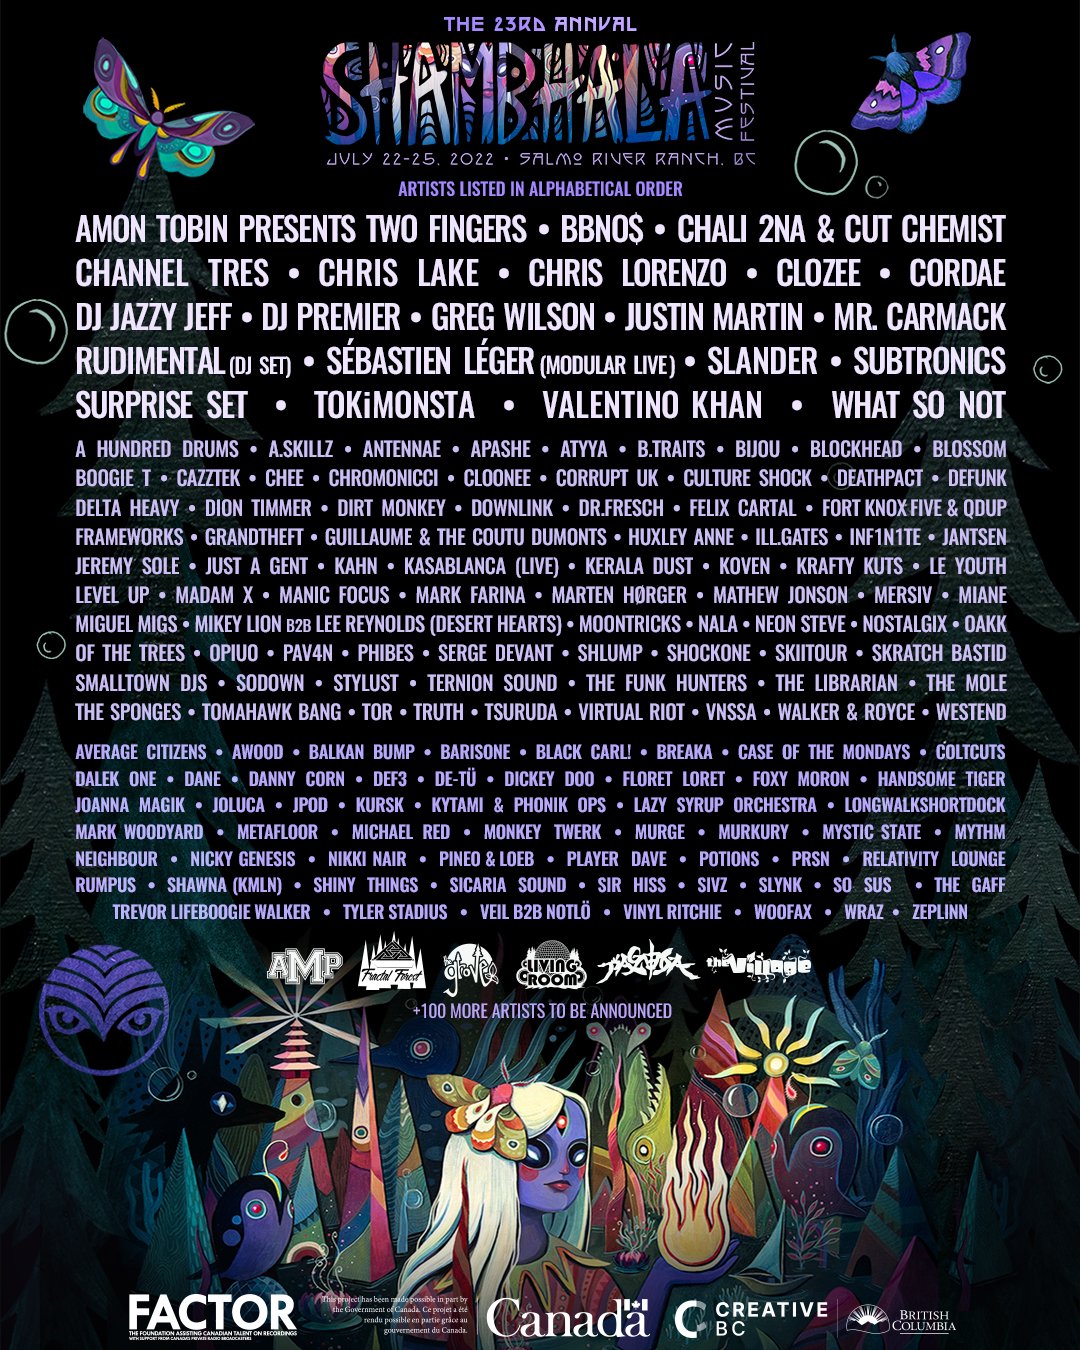 Shambhala Music Festival Drops Stacked Lineup for 23rd Annual Event